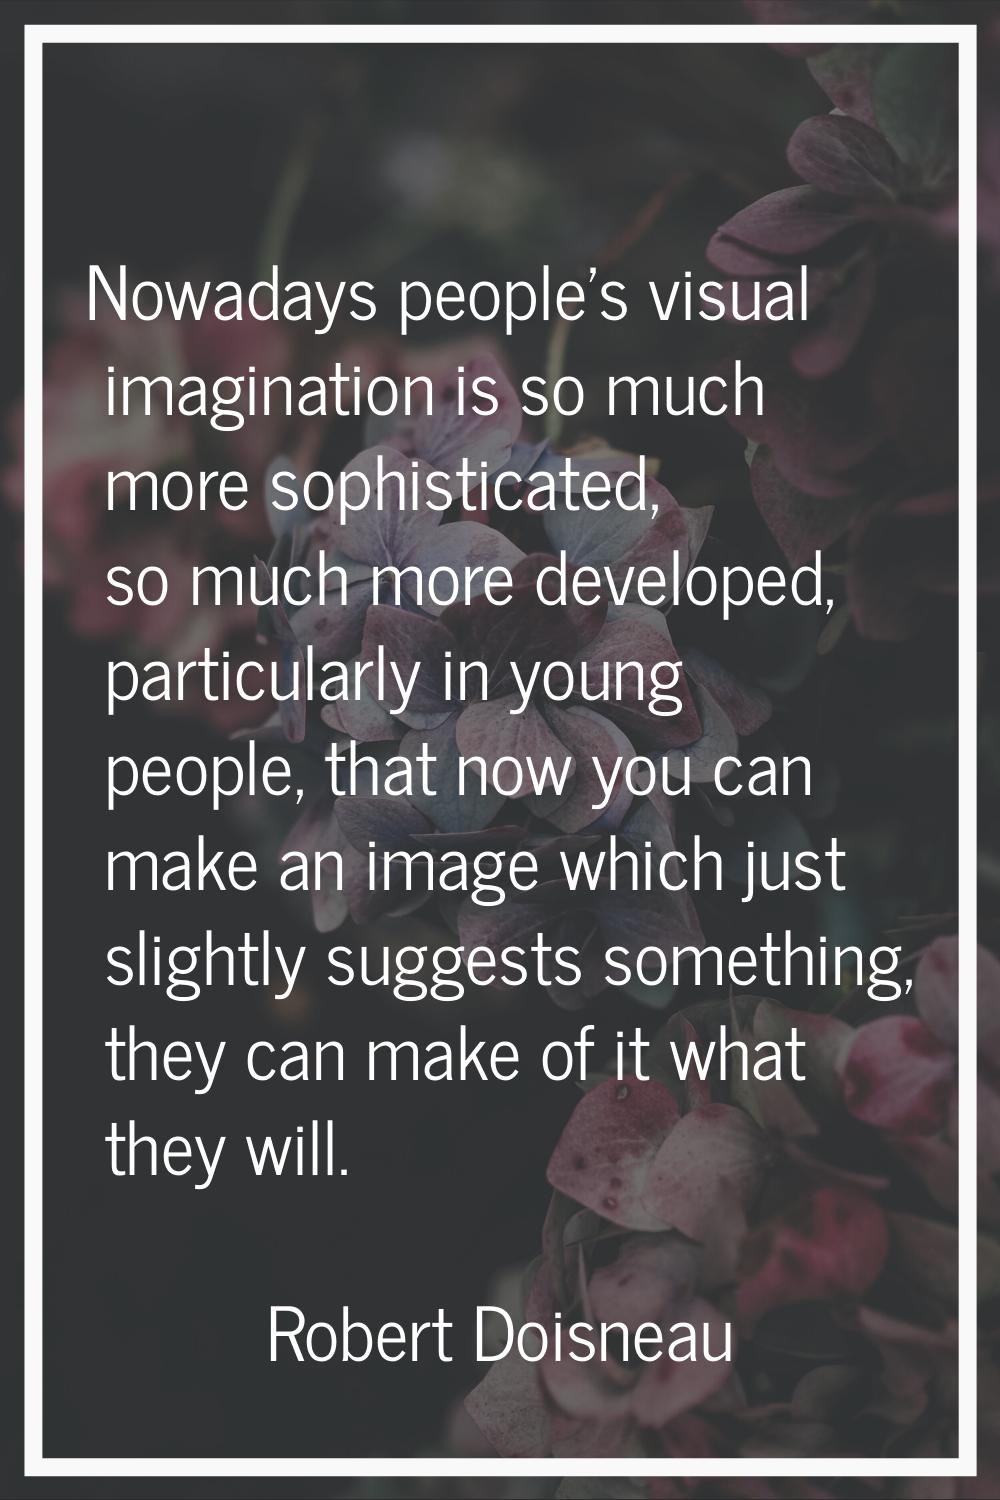 Nowadays people's visual imagination is so much more sophisticated, so much more developed, particu